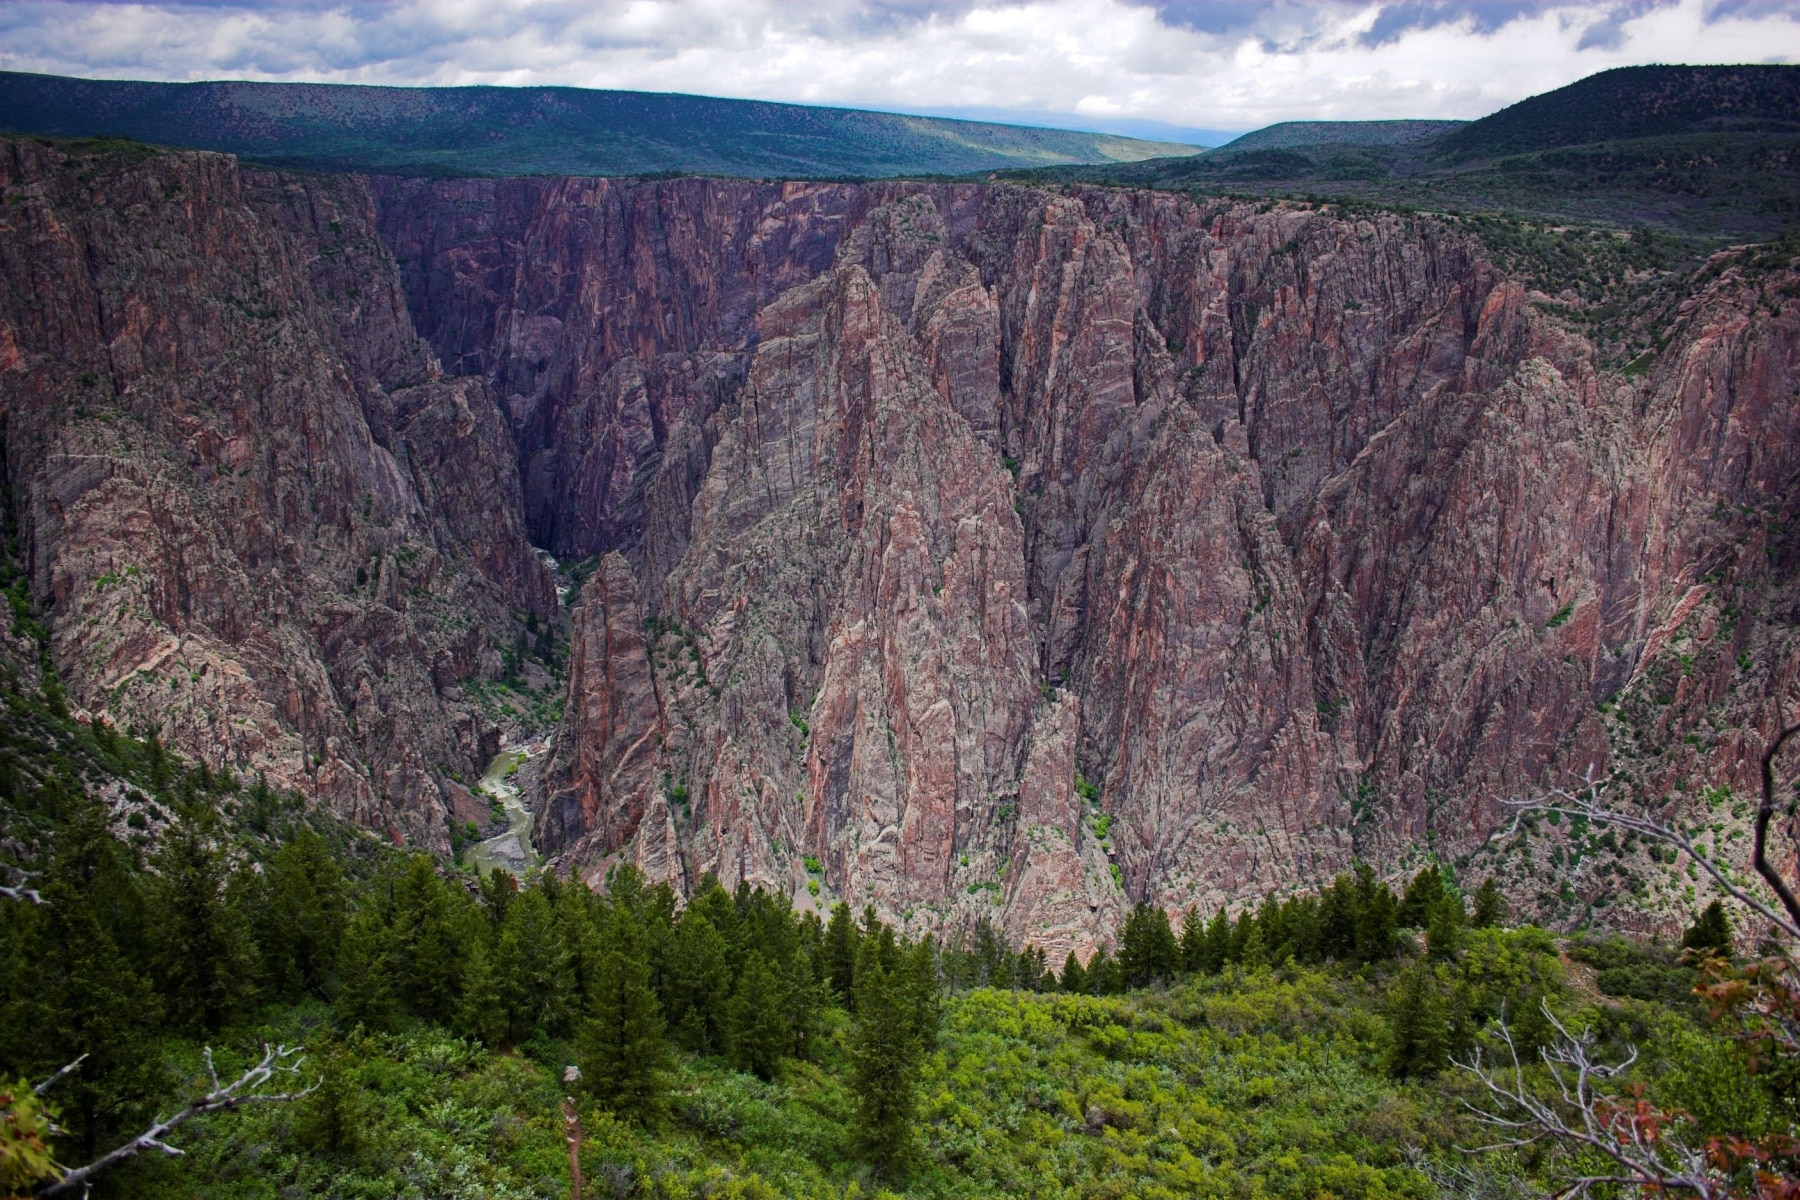 Black Canyon of the Gunnison gorge, 